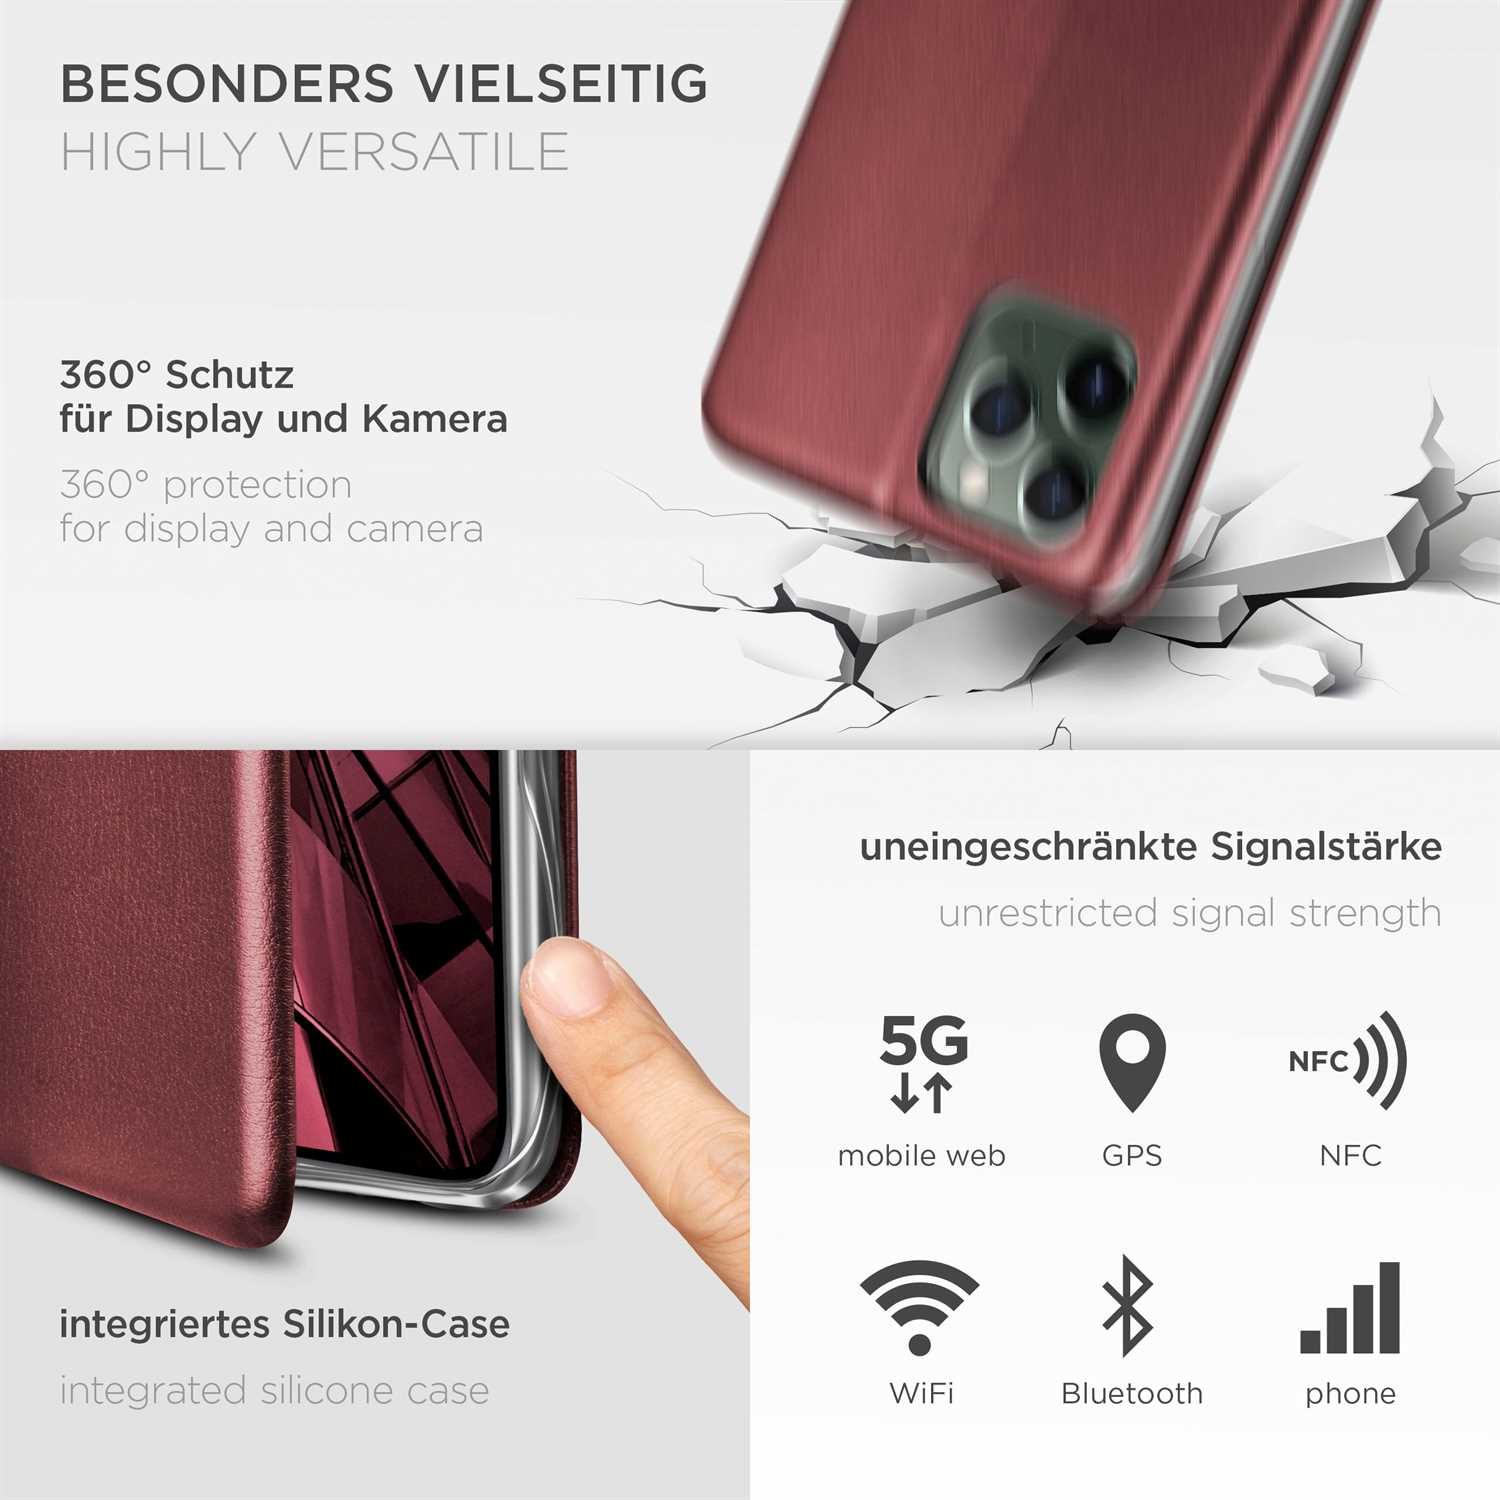 Flip Cover, Pro Apple, - Burgund Red Case, Max, Business ONEFLOW iPhone 11